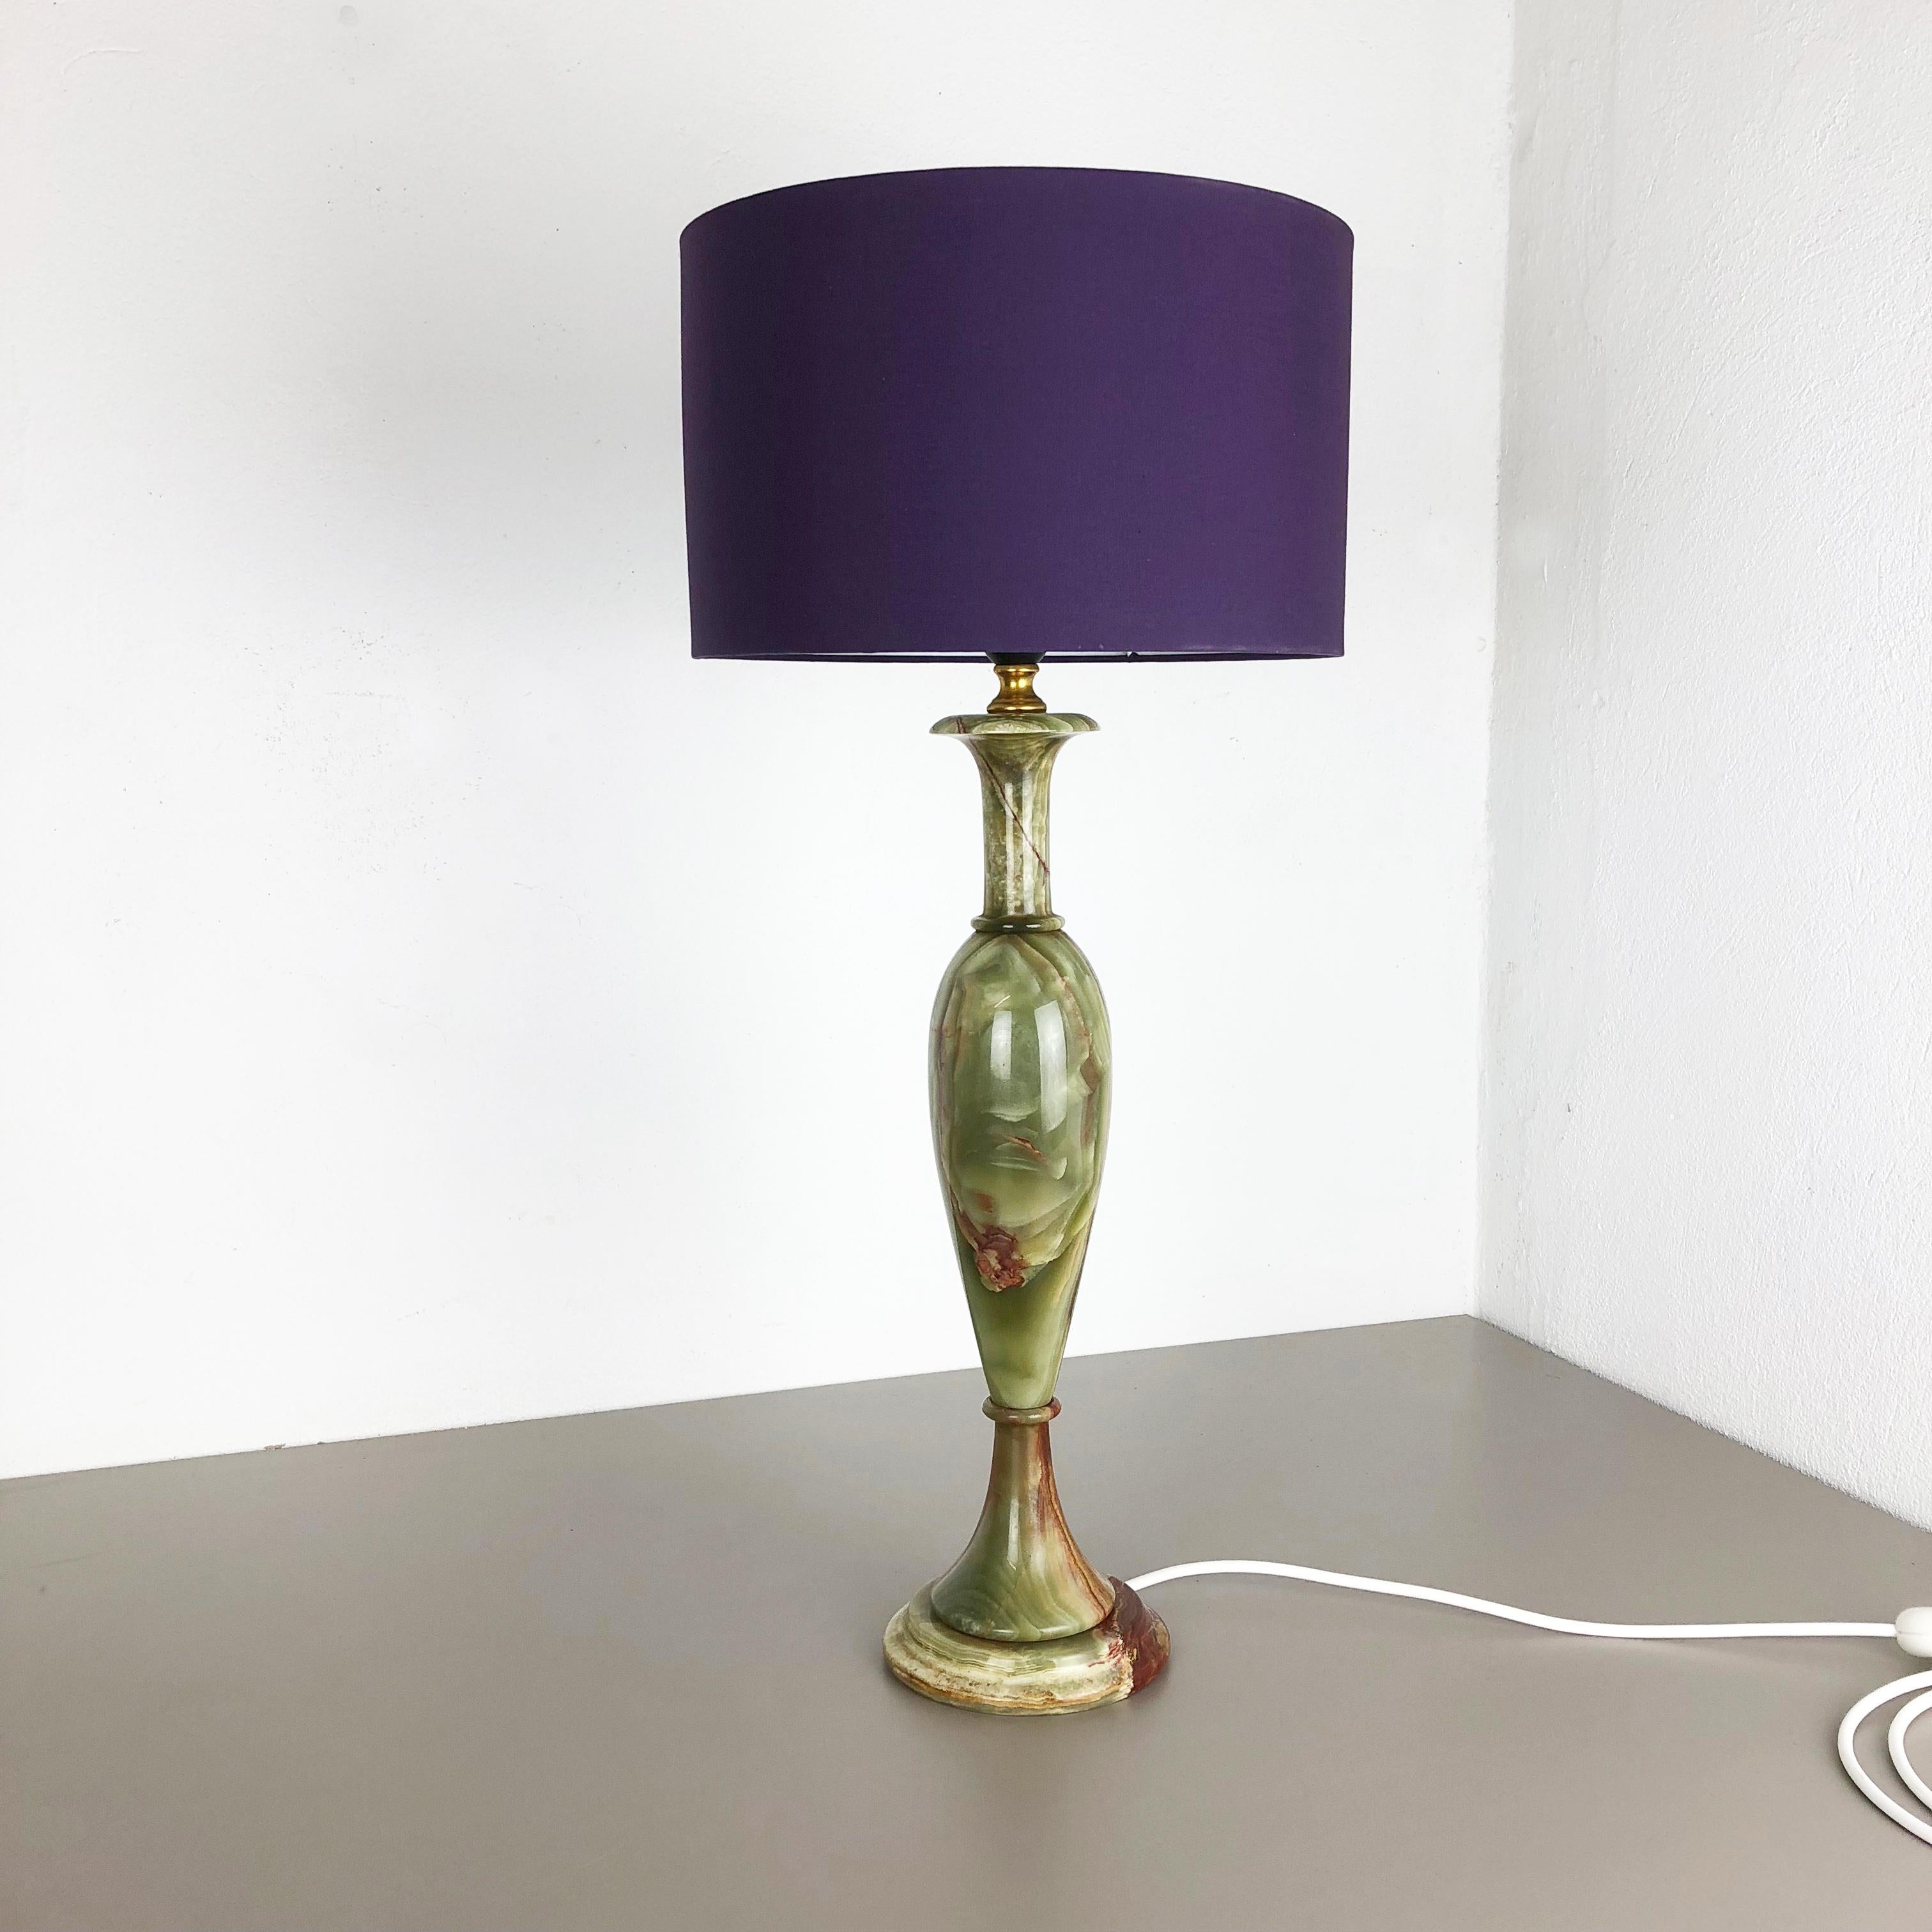 Article:

Impressive large onyx marble light base stand


Origin:

Italy


Decade:

1970s



Description:

This original vintage light base element is made of high quality onyx marble standing on a nice shaped tulip formed base